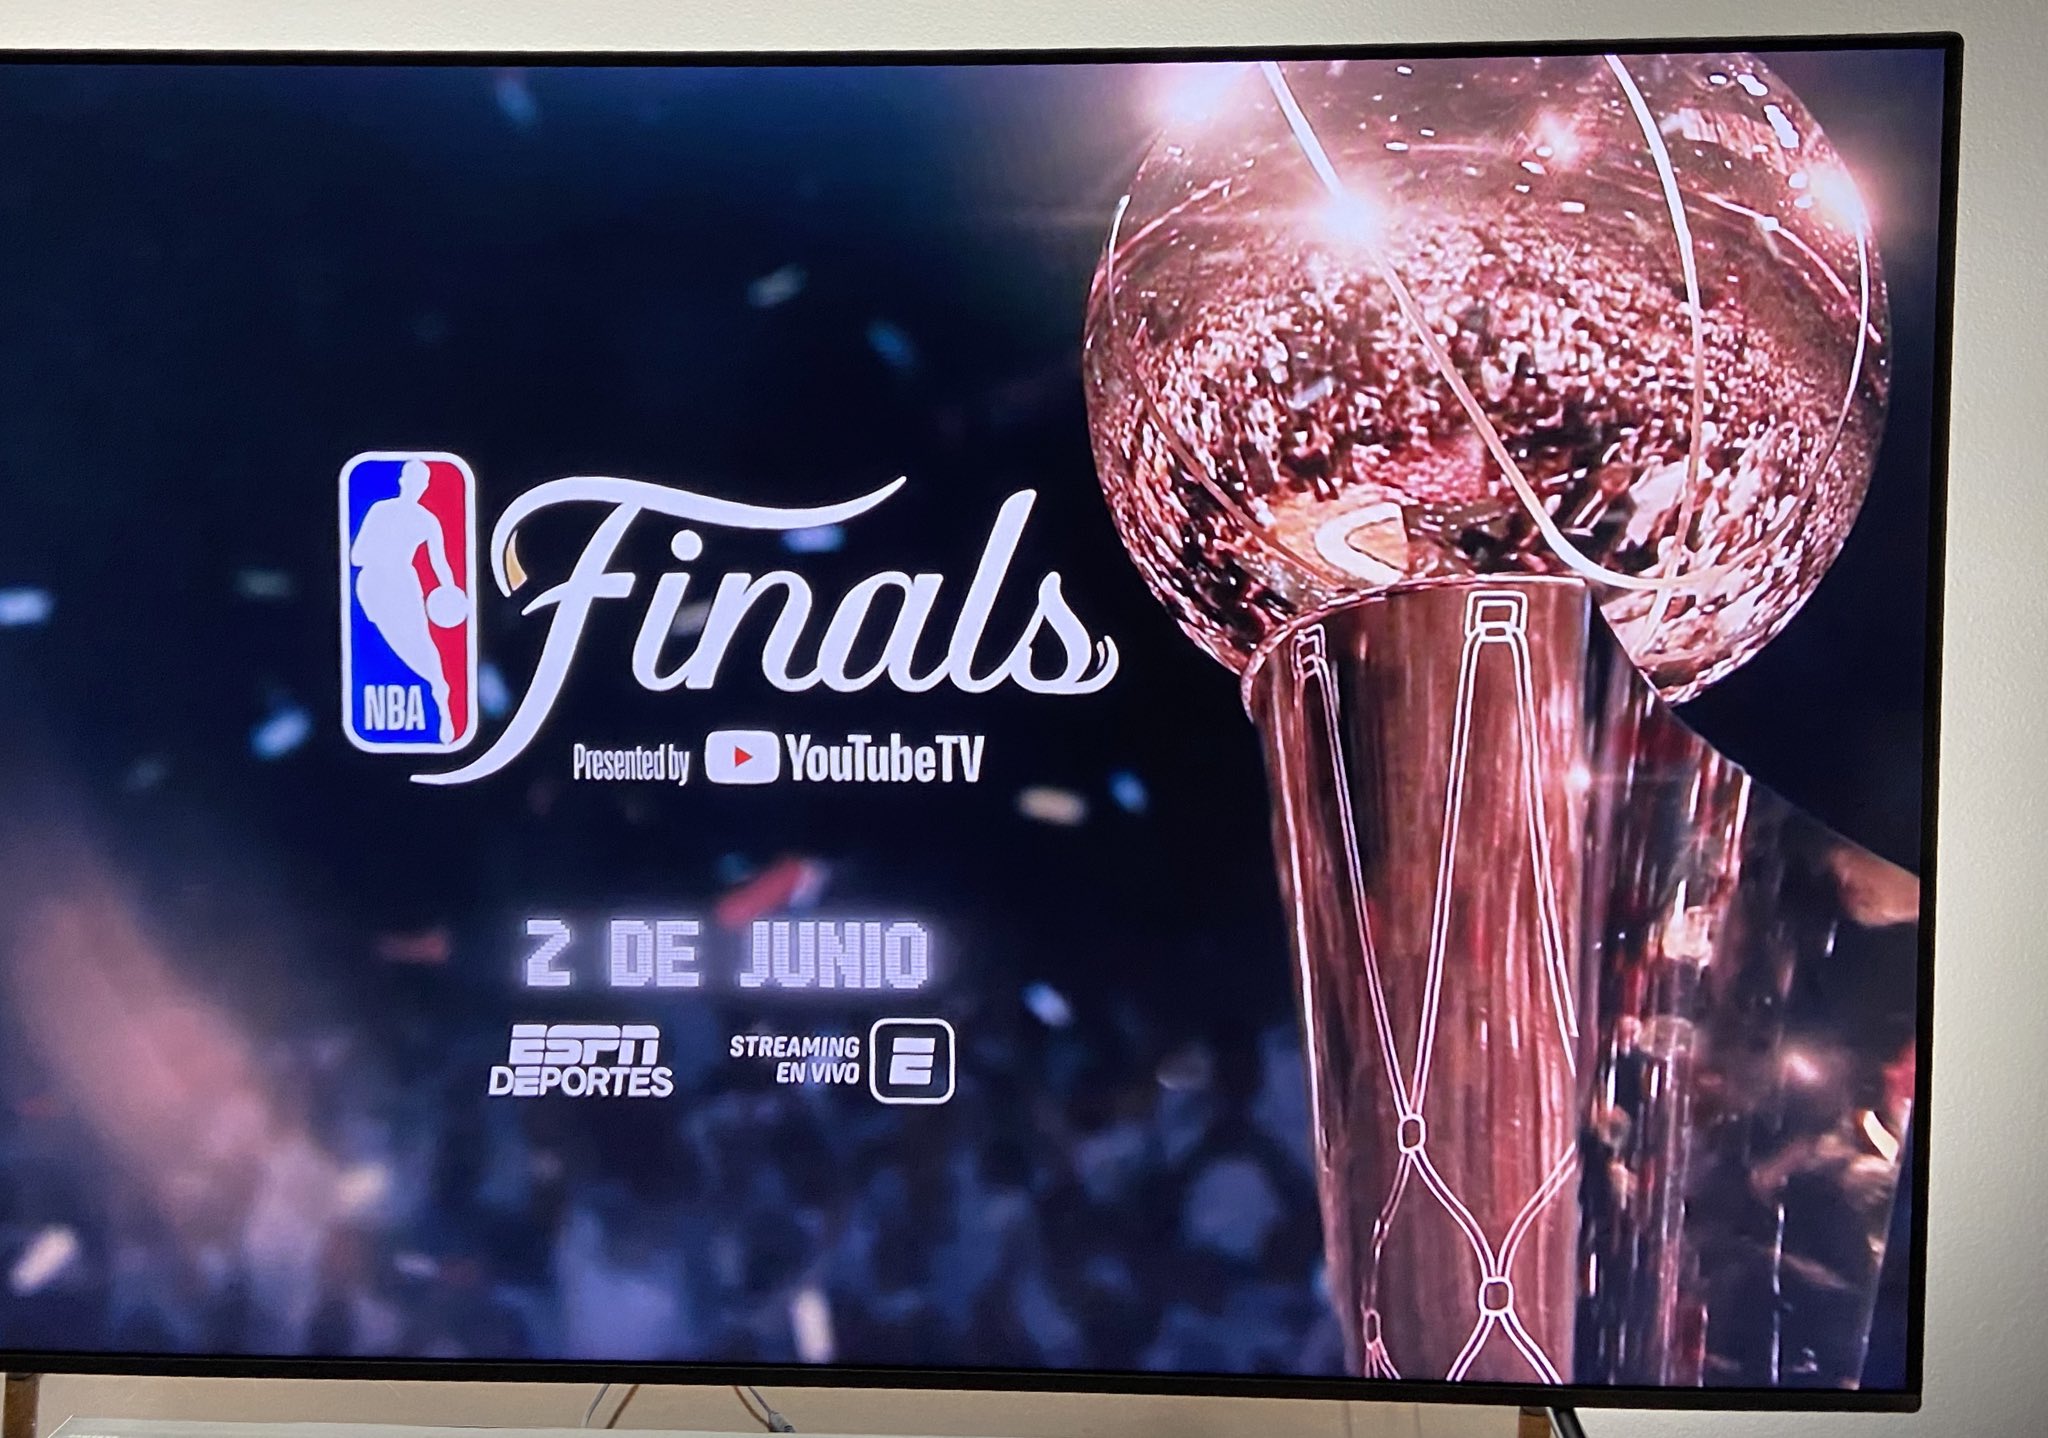 TV ads are ruining the look of the NBA Finals